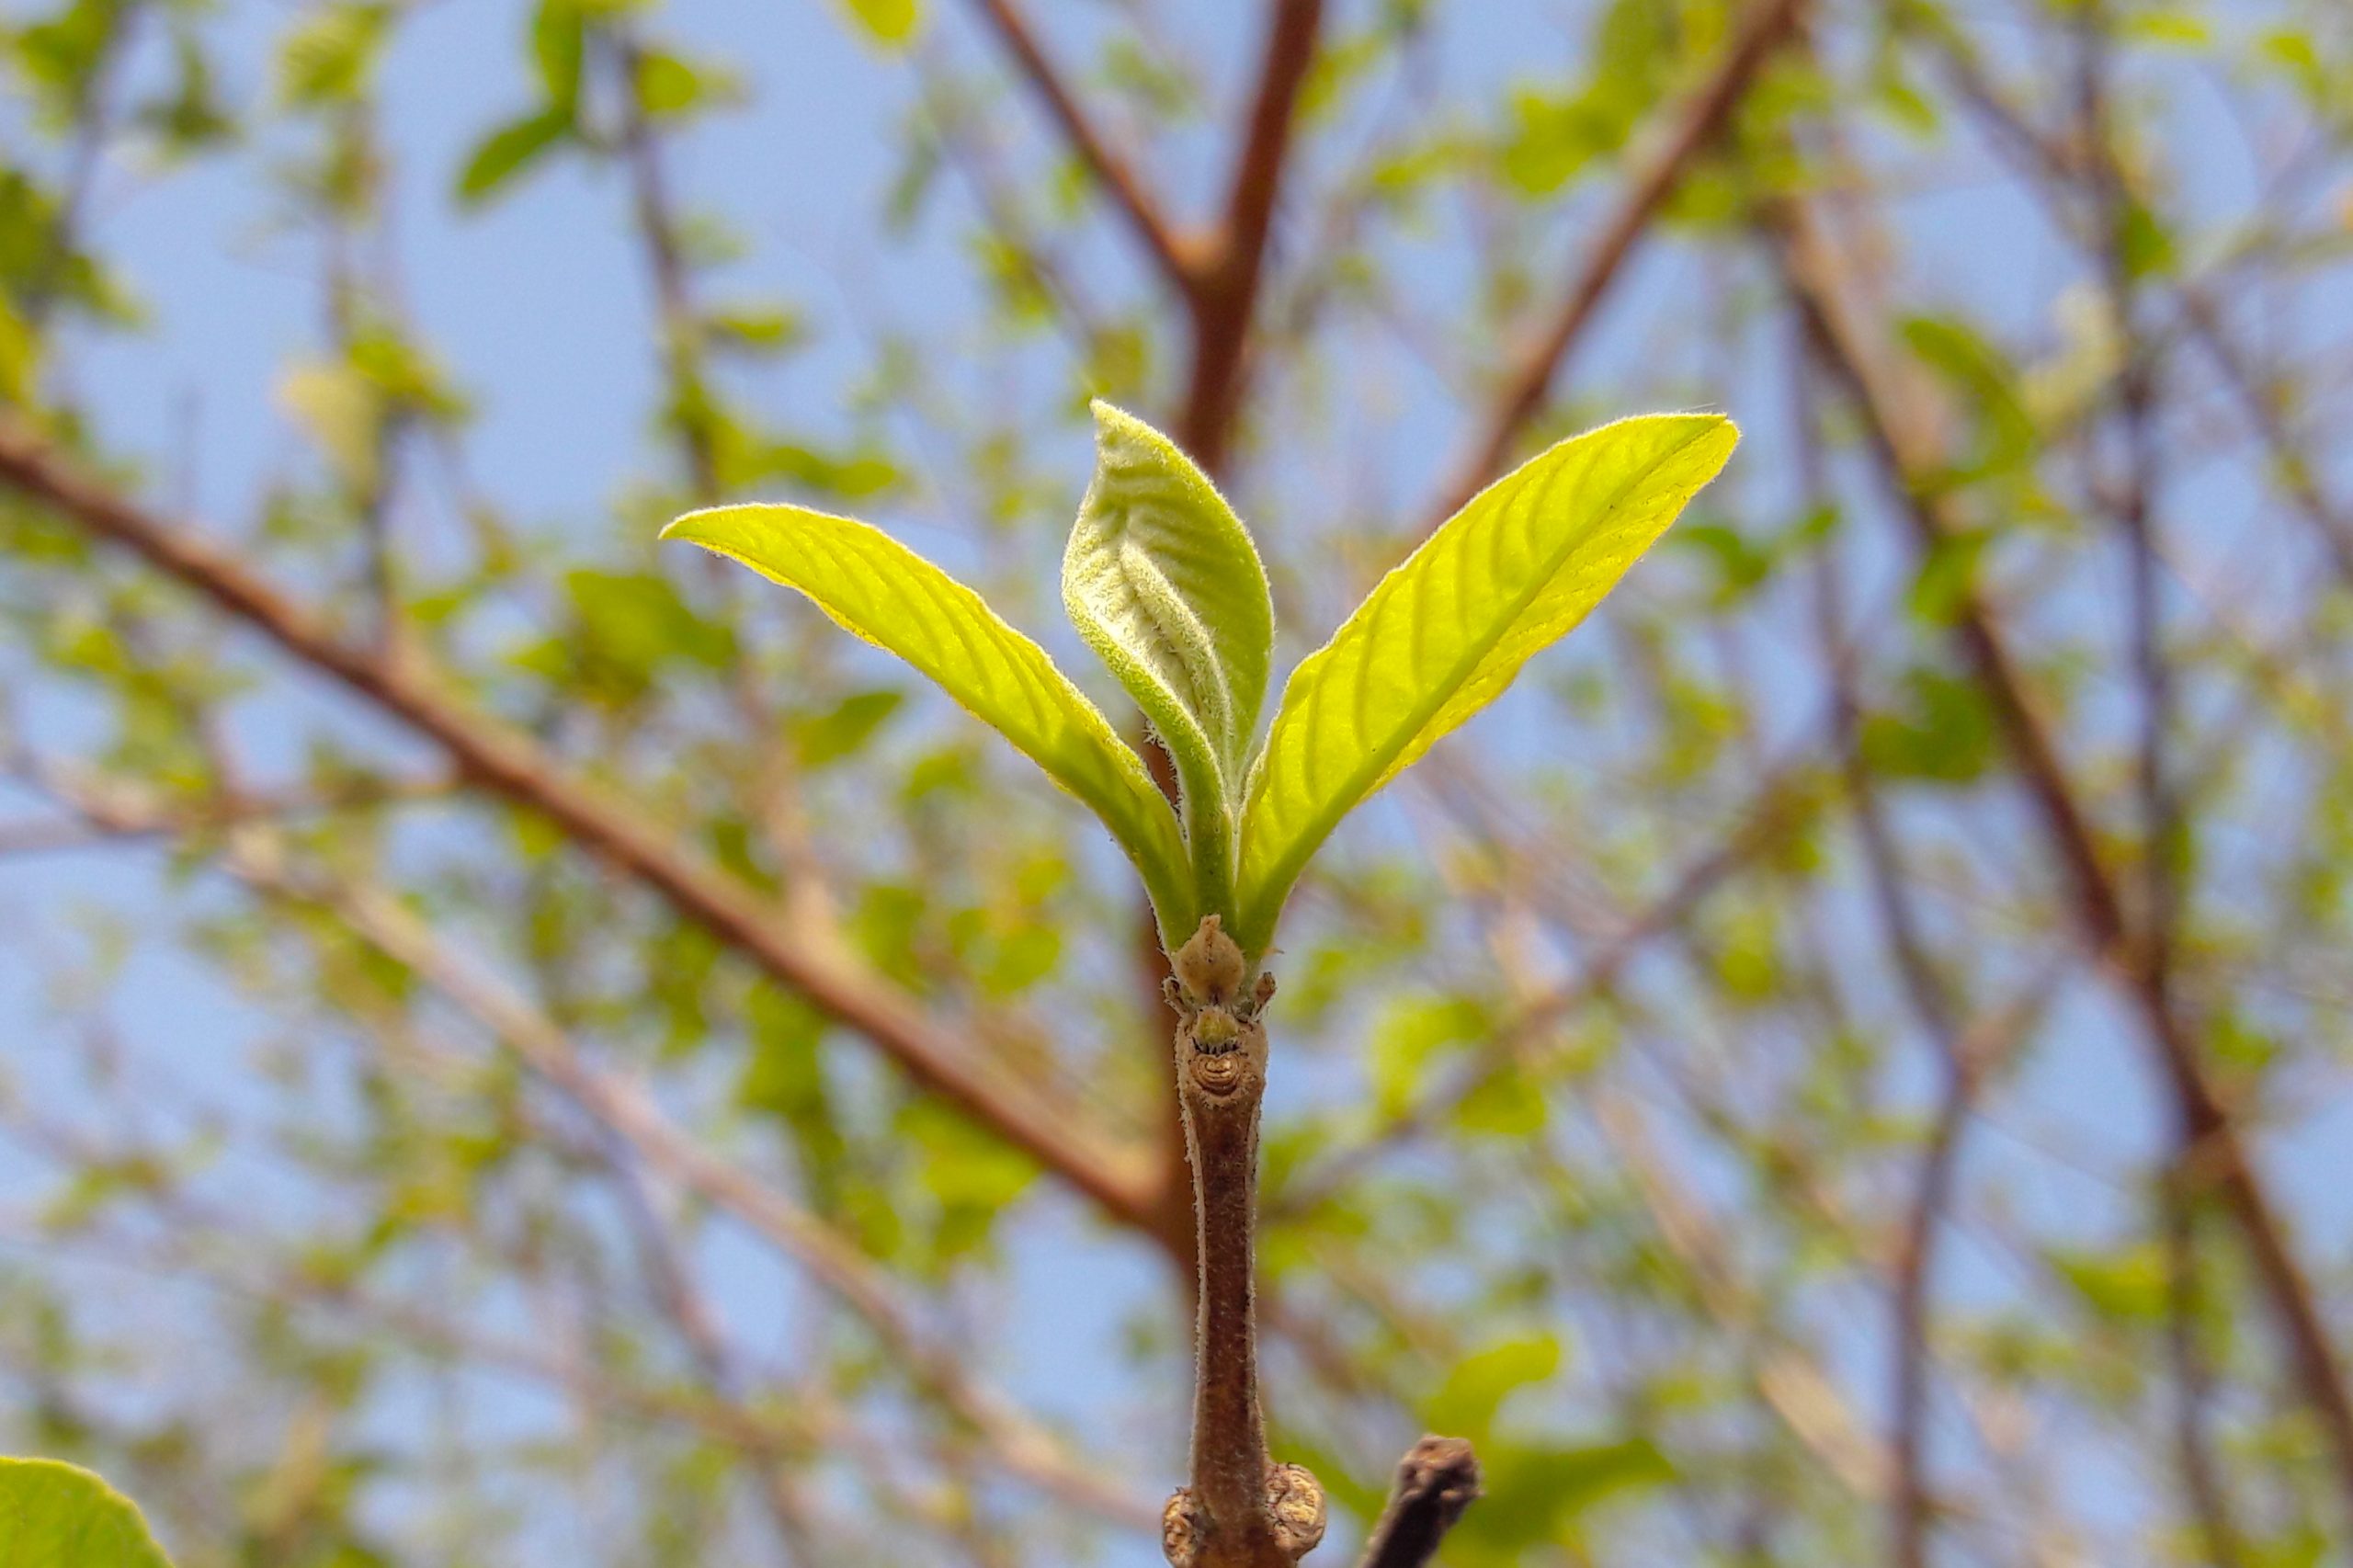 Growing leaves of a plant